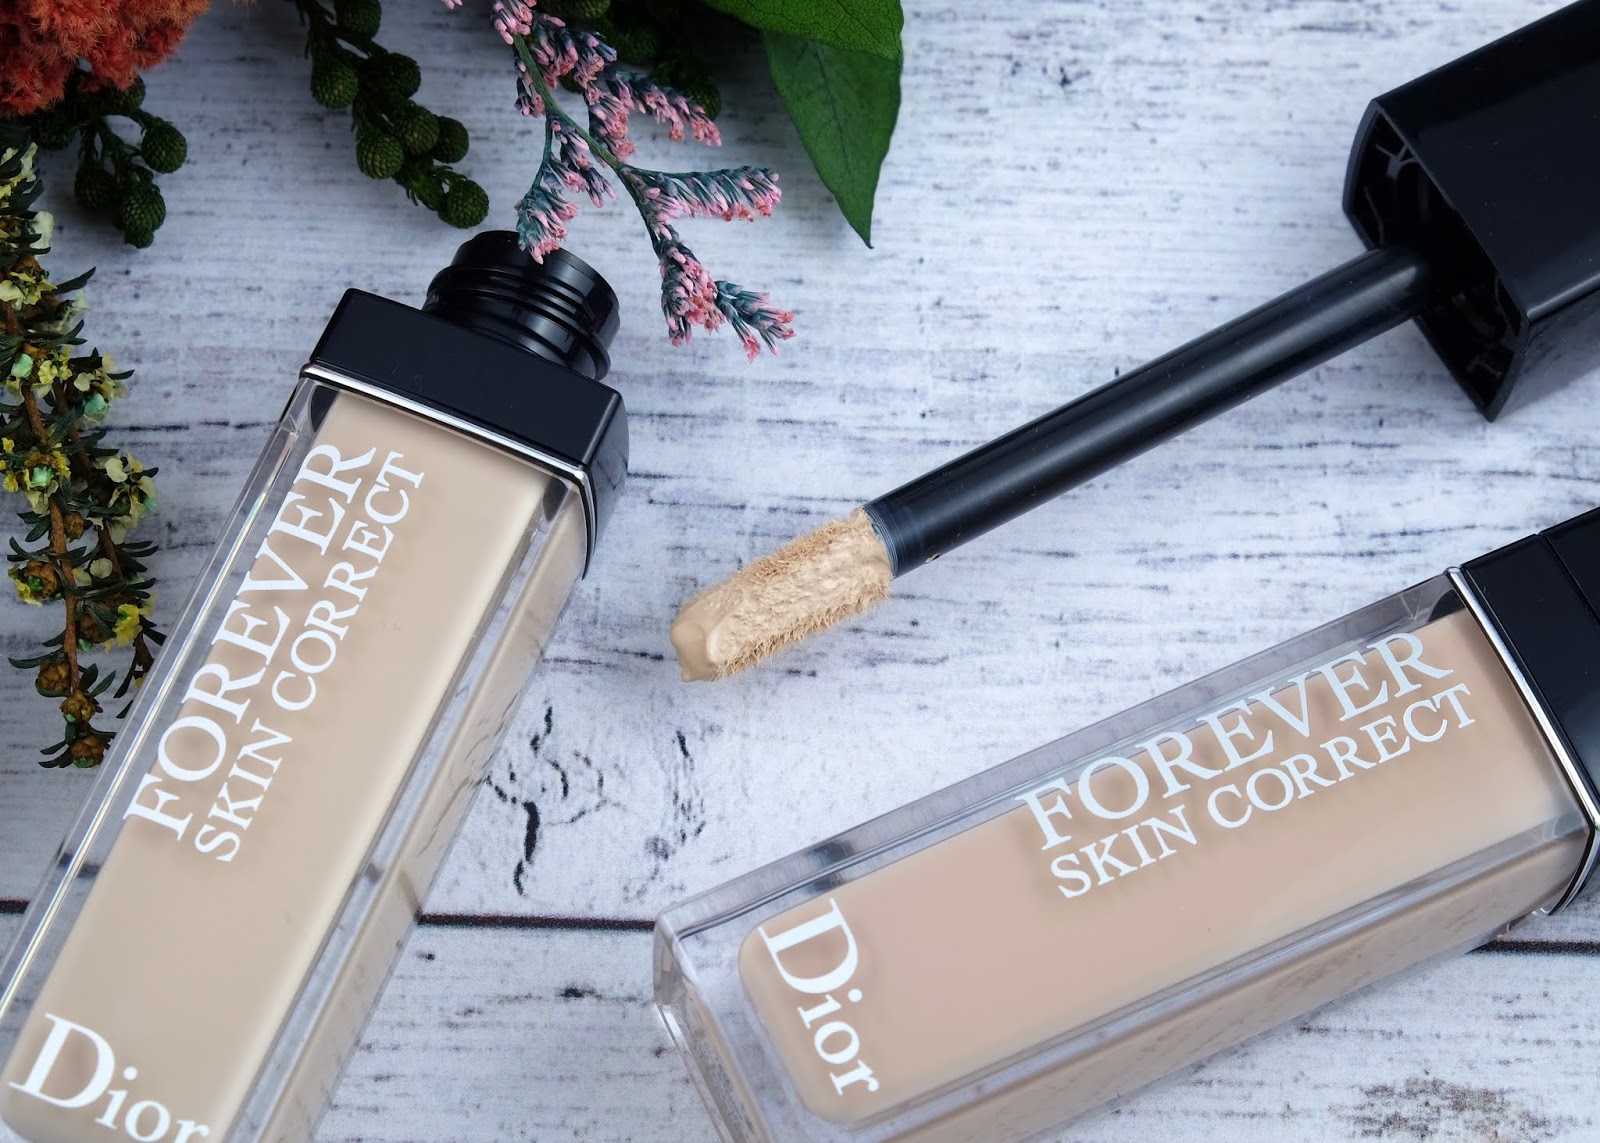 Dior Forever Skin Correct Concealer in "0N" & "1N": Review and Swatches